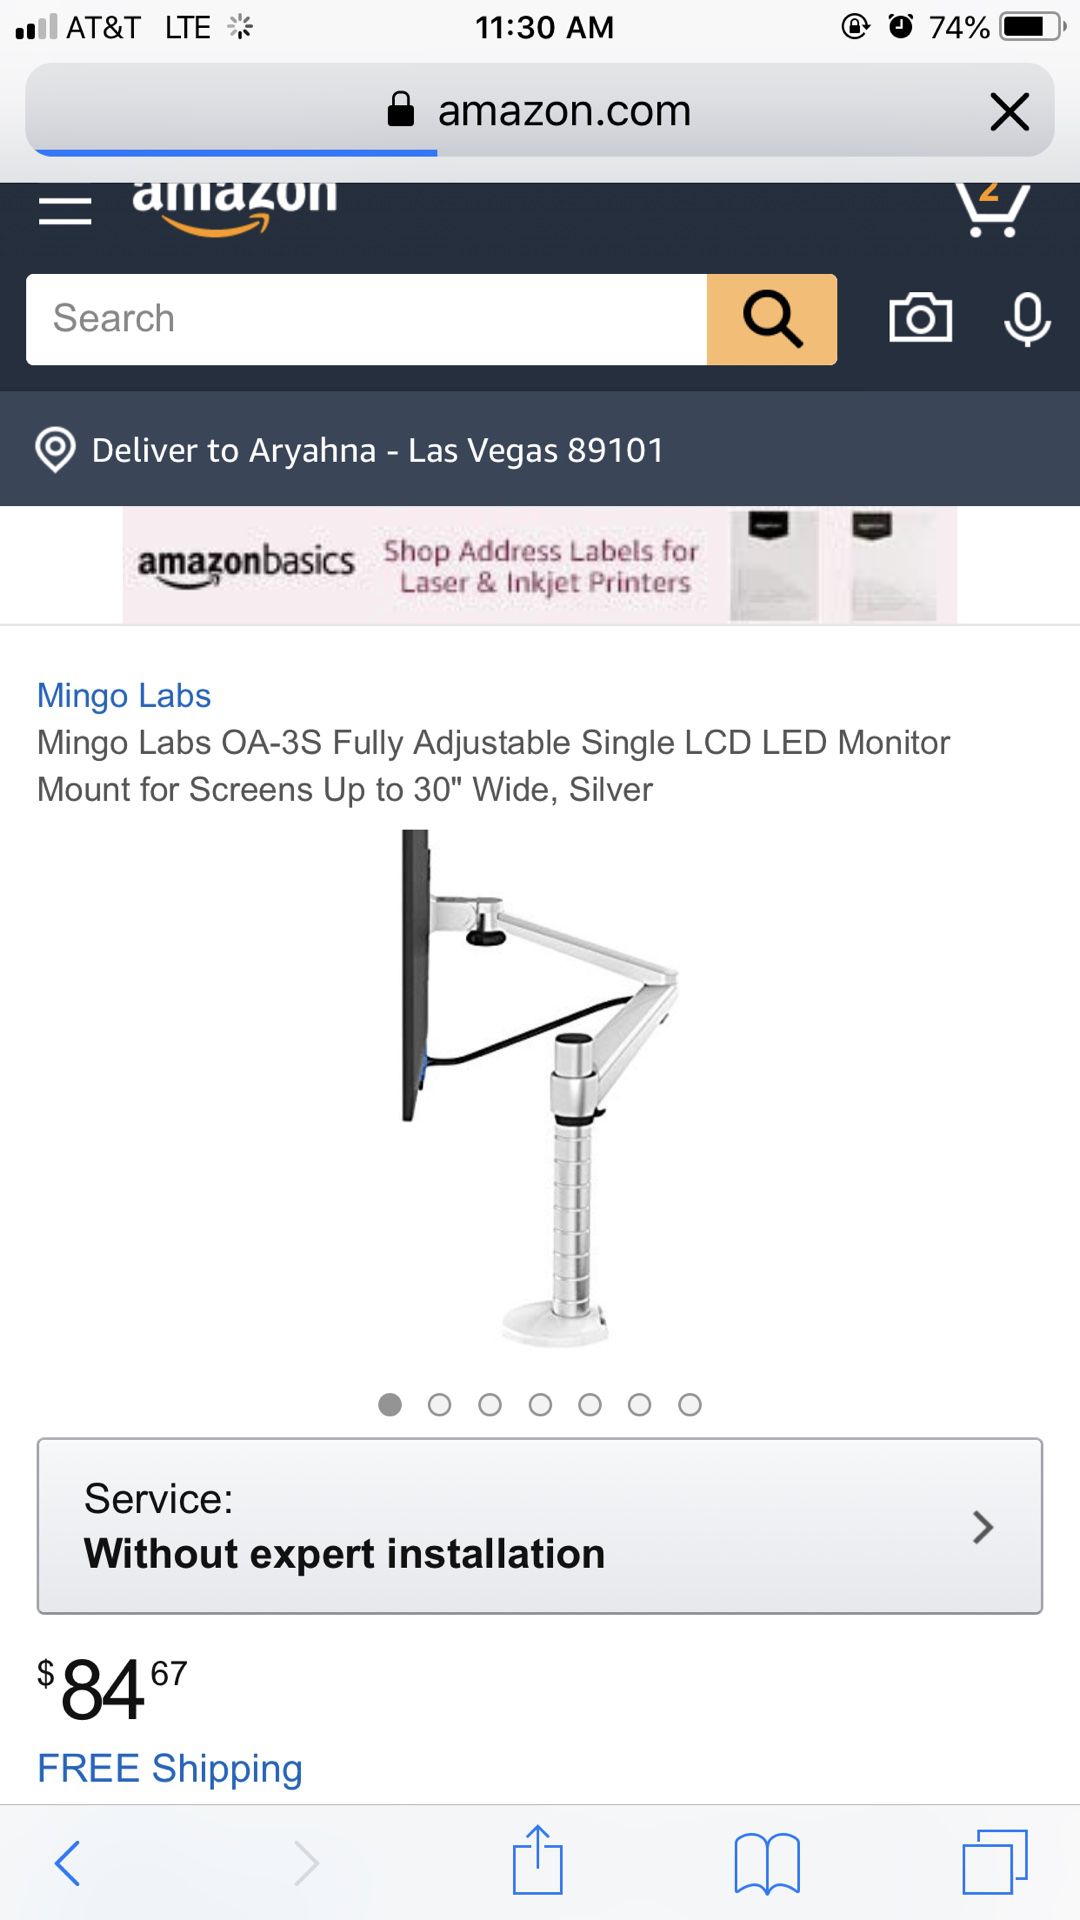 Adjustable Monitoring Mount For Screens Up to 30”